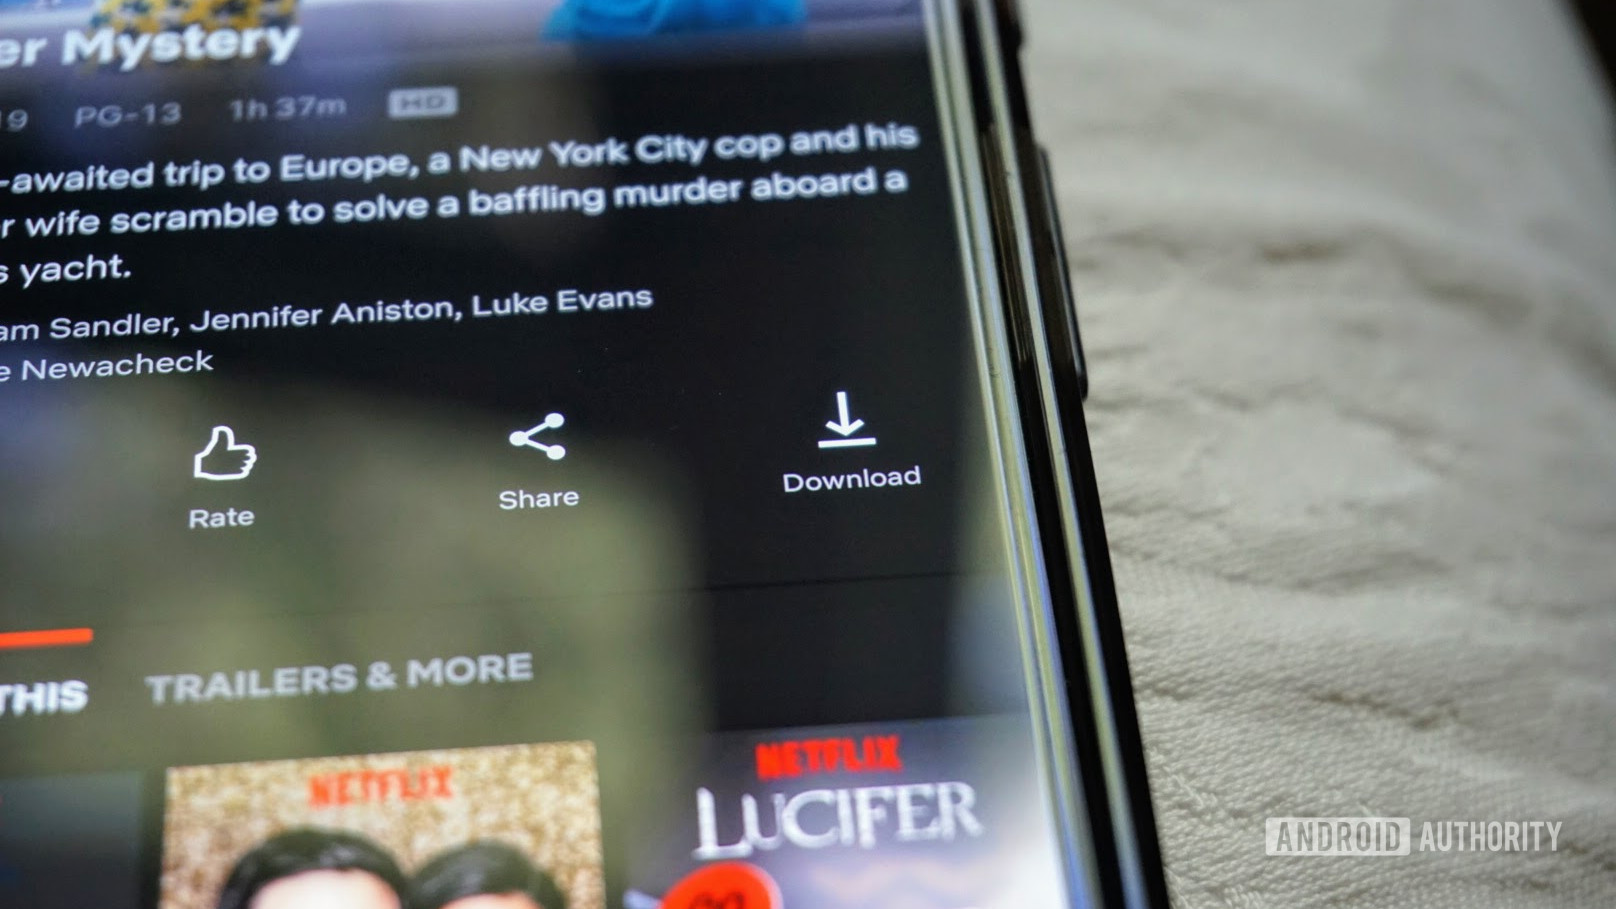 How to download movies and TV shows from Netflix